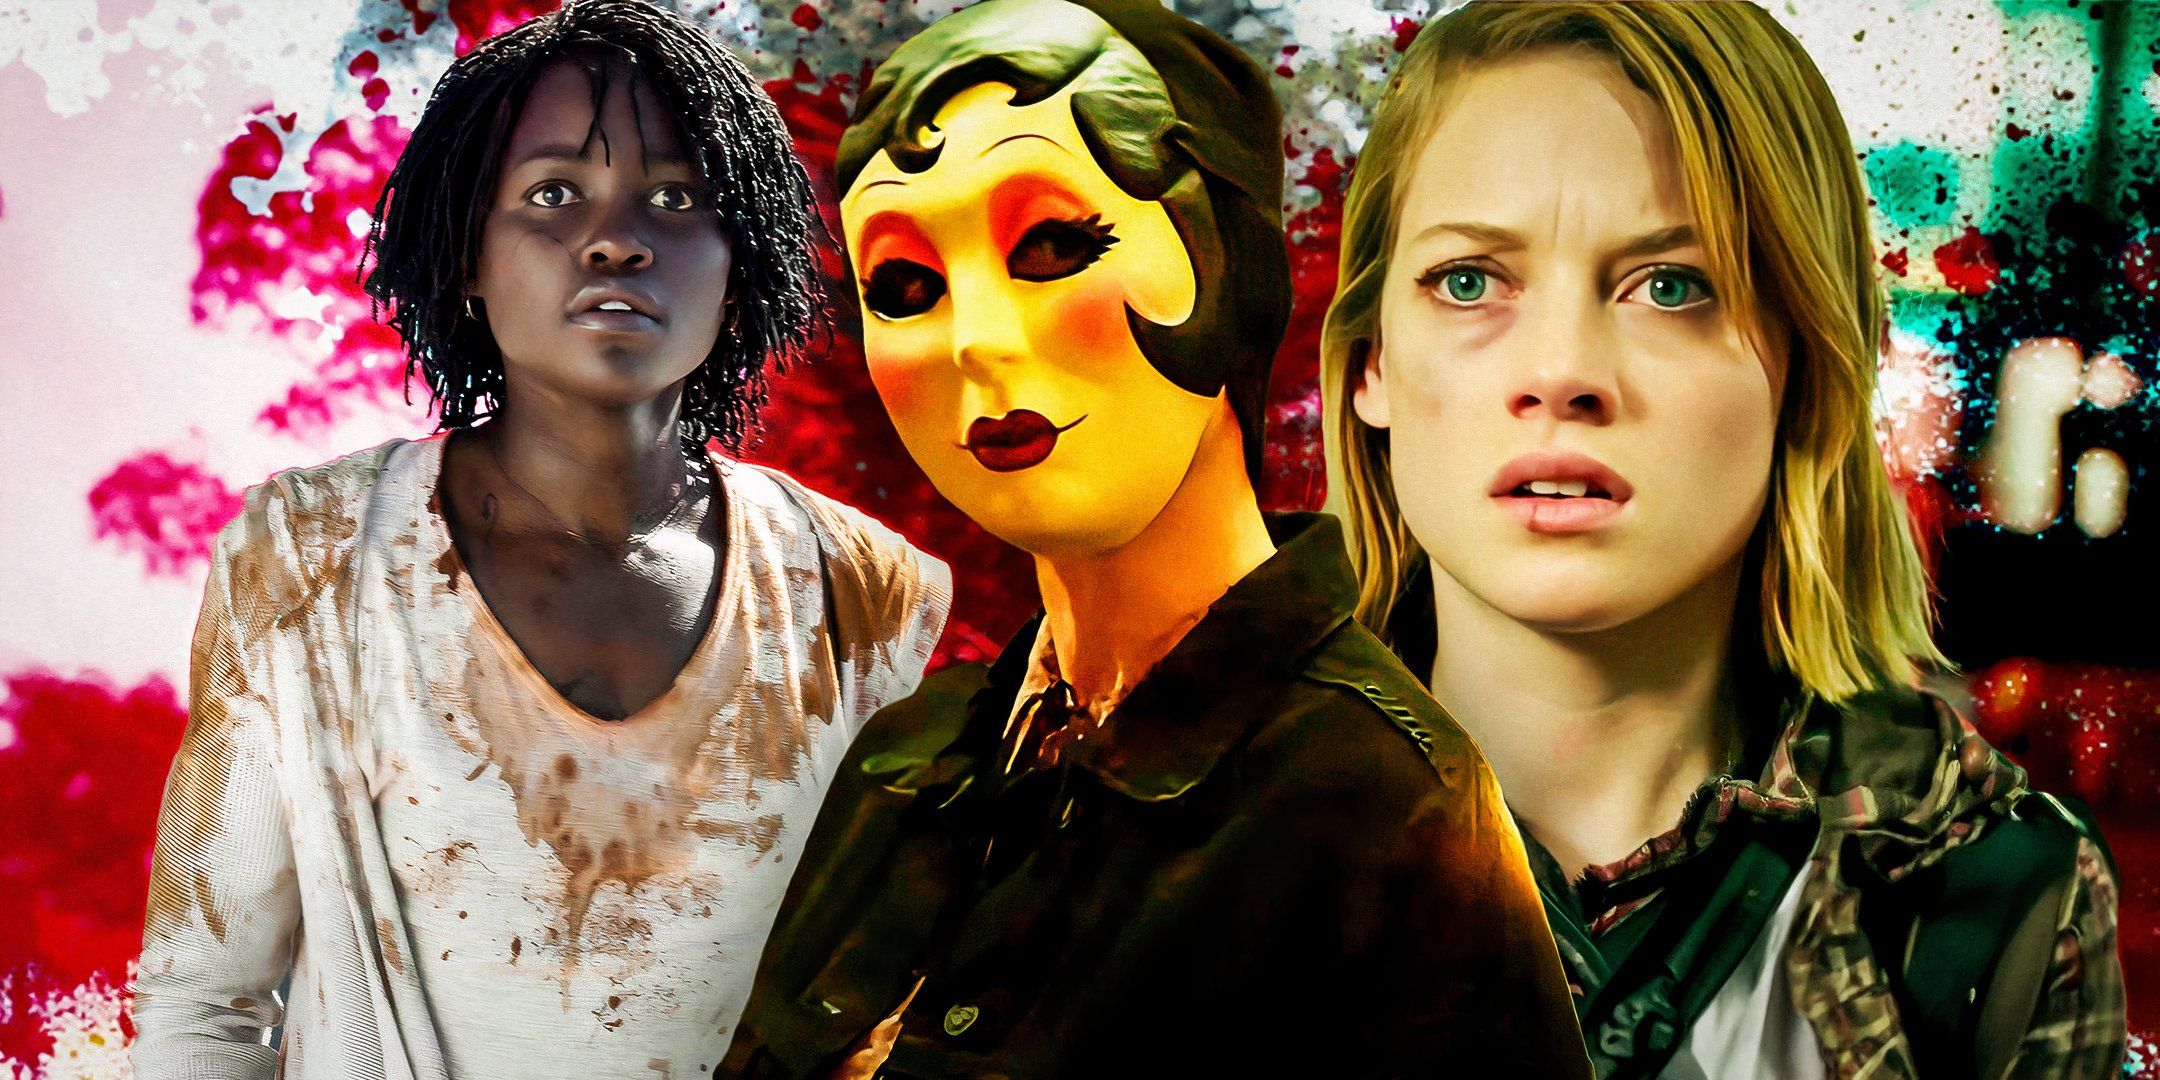 Lupita Nyongo as Adelaide Wilson from Us and Jane Levy as Rocky from Don't Breathe and A Masked Stranger from The strangers